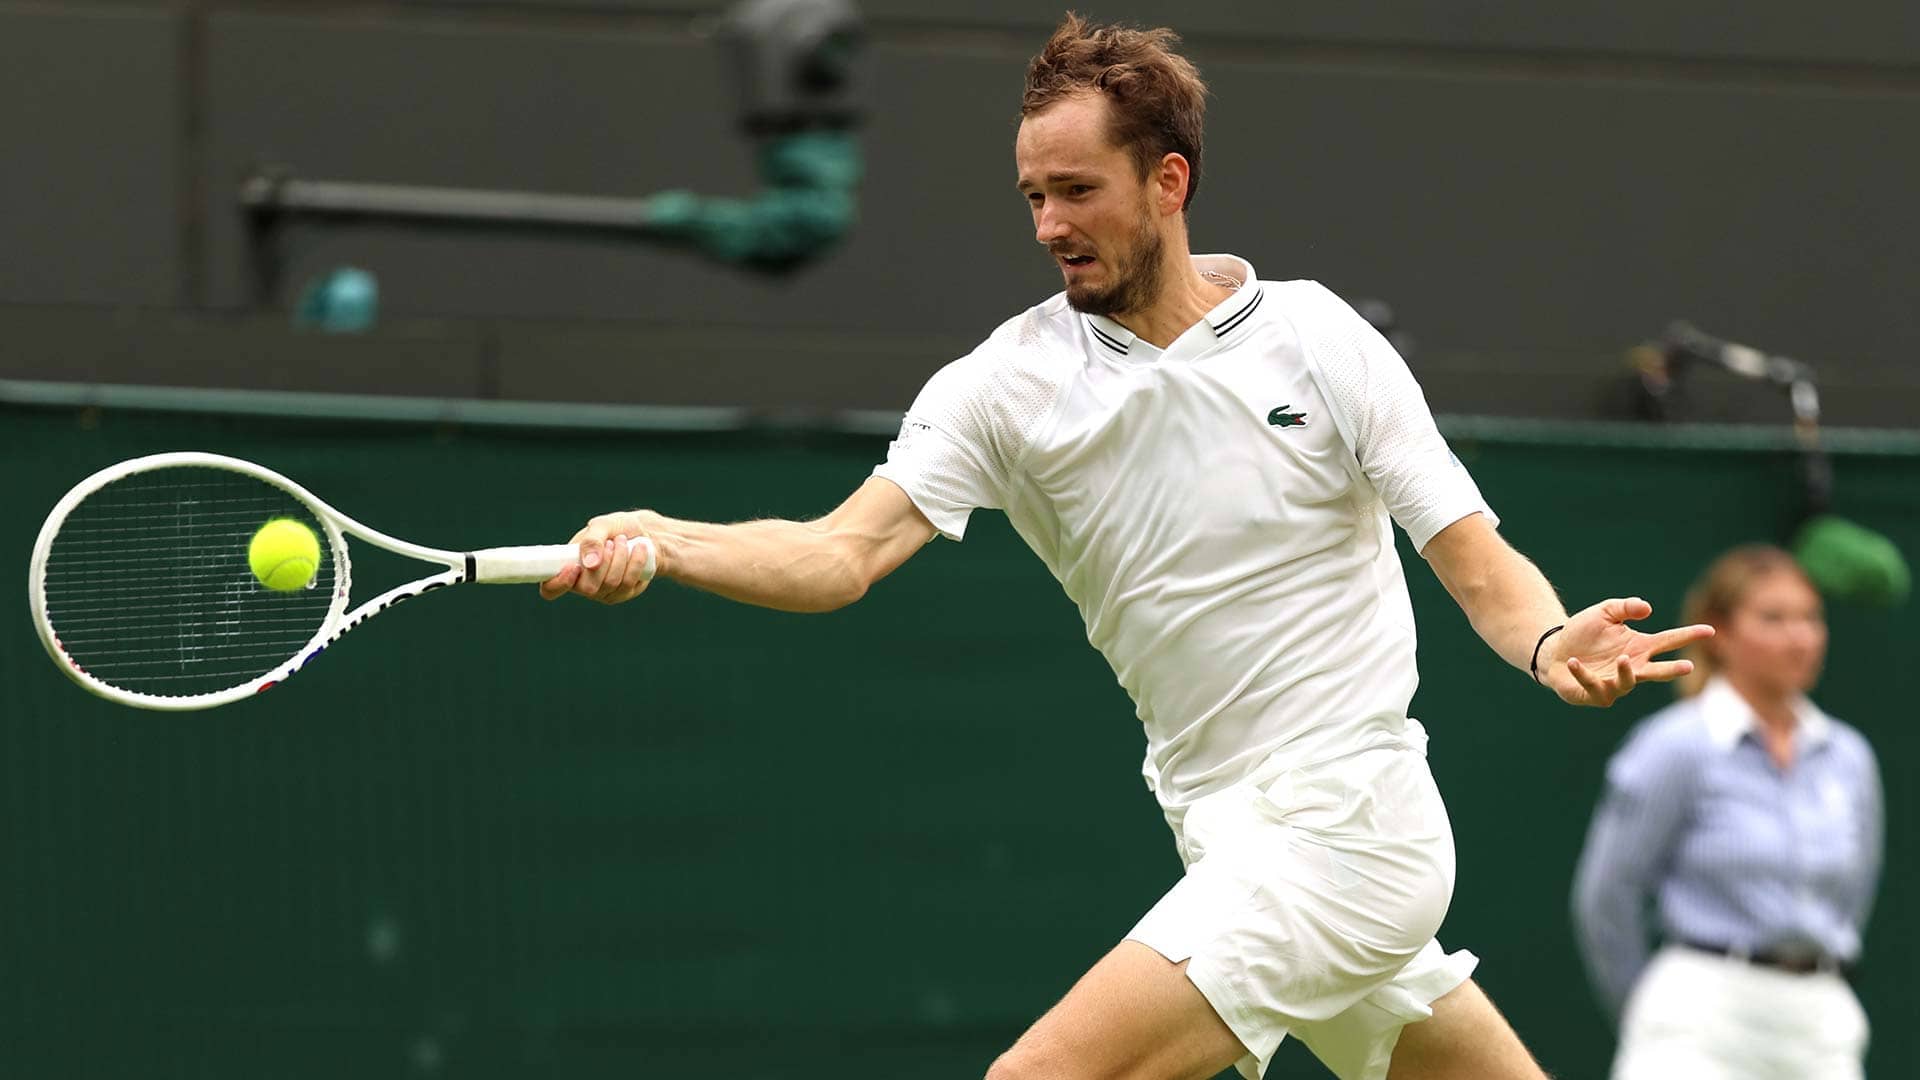 Daniil Medvedev in action on Monday at Wimbledon.